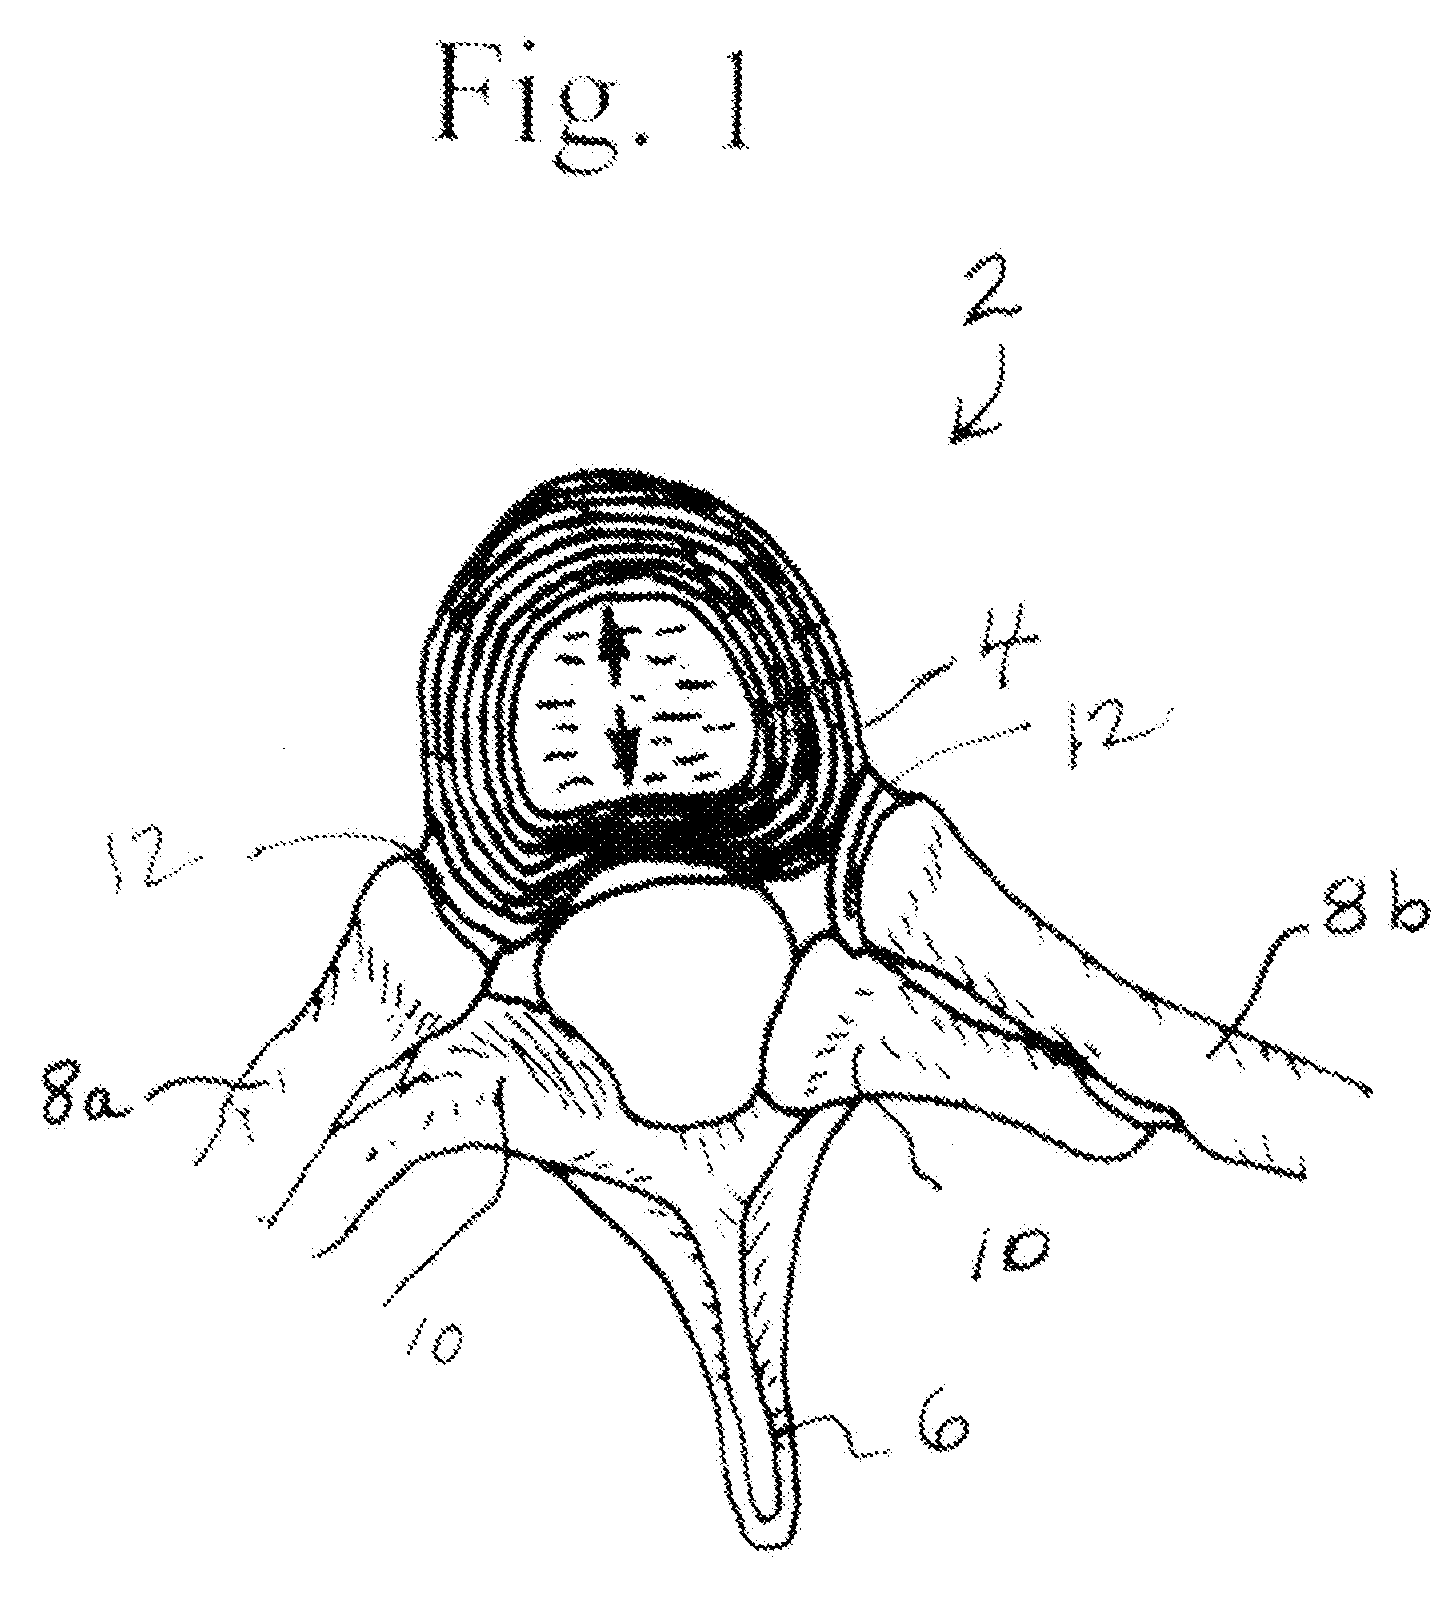 Backrest Apparatus Comprising a Concave Support Pad with Convex End Portions